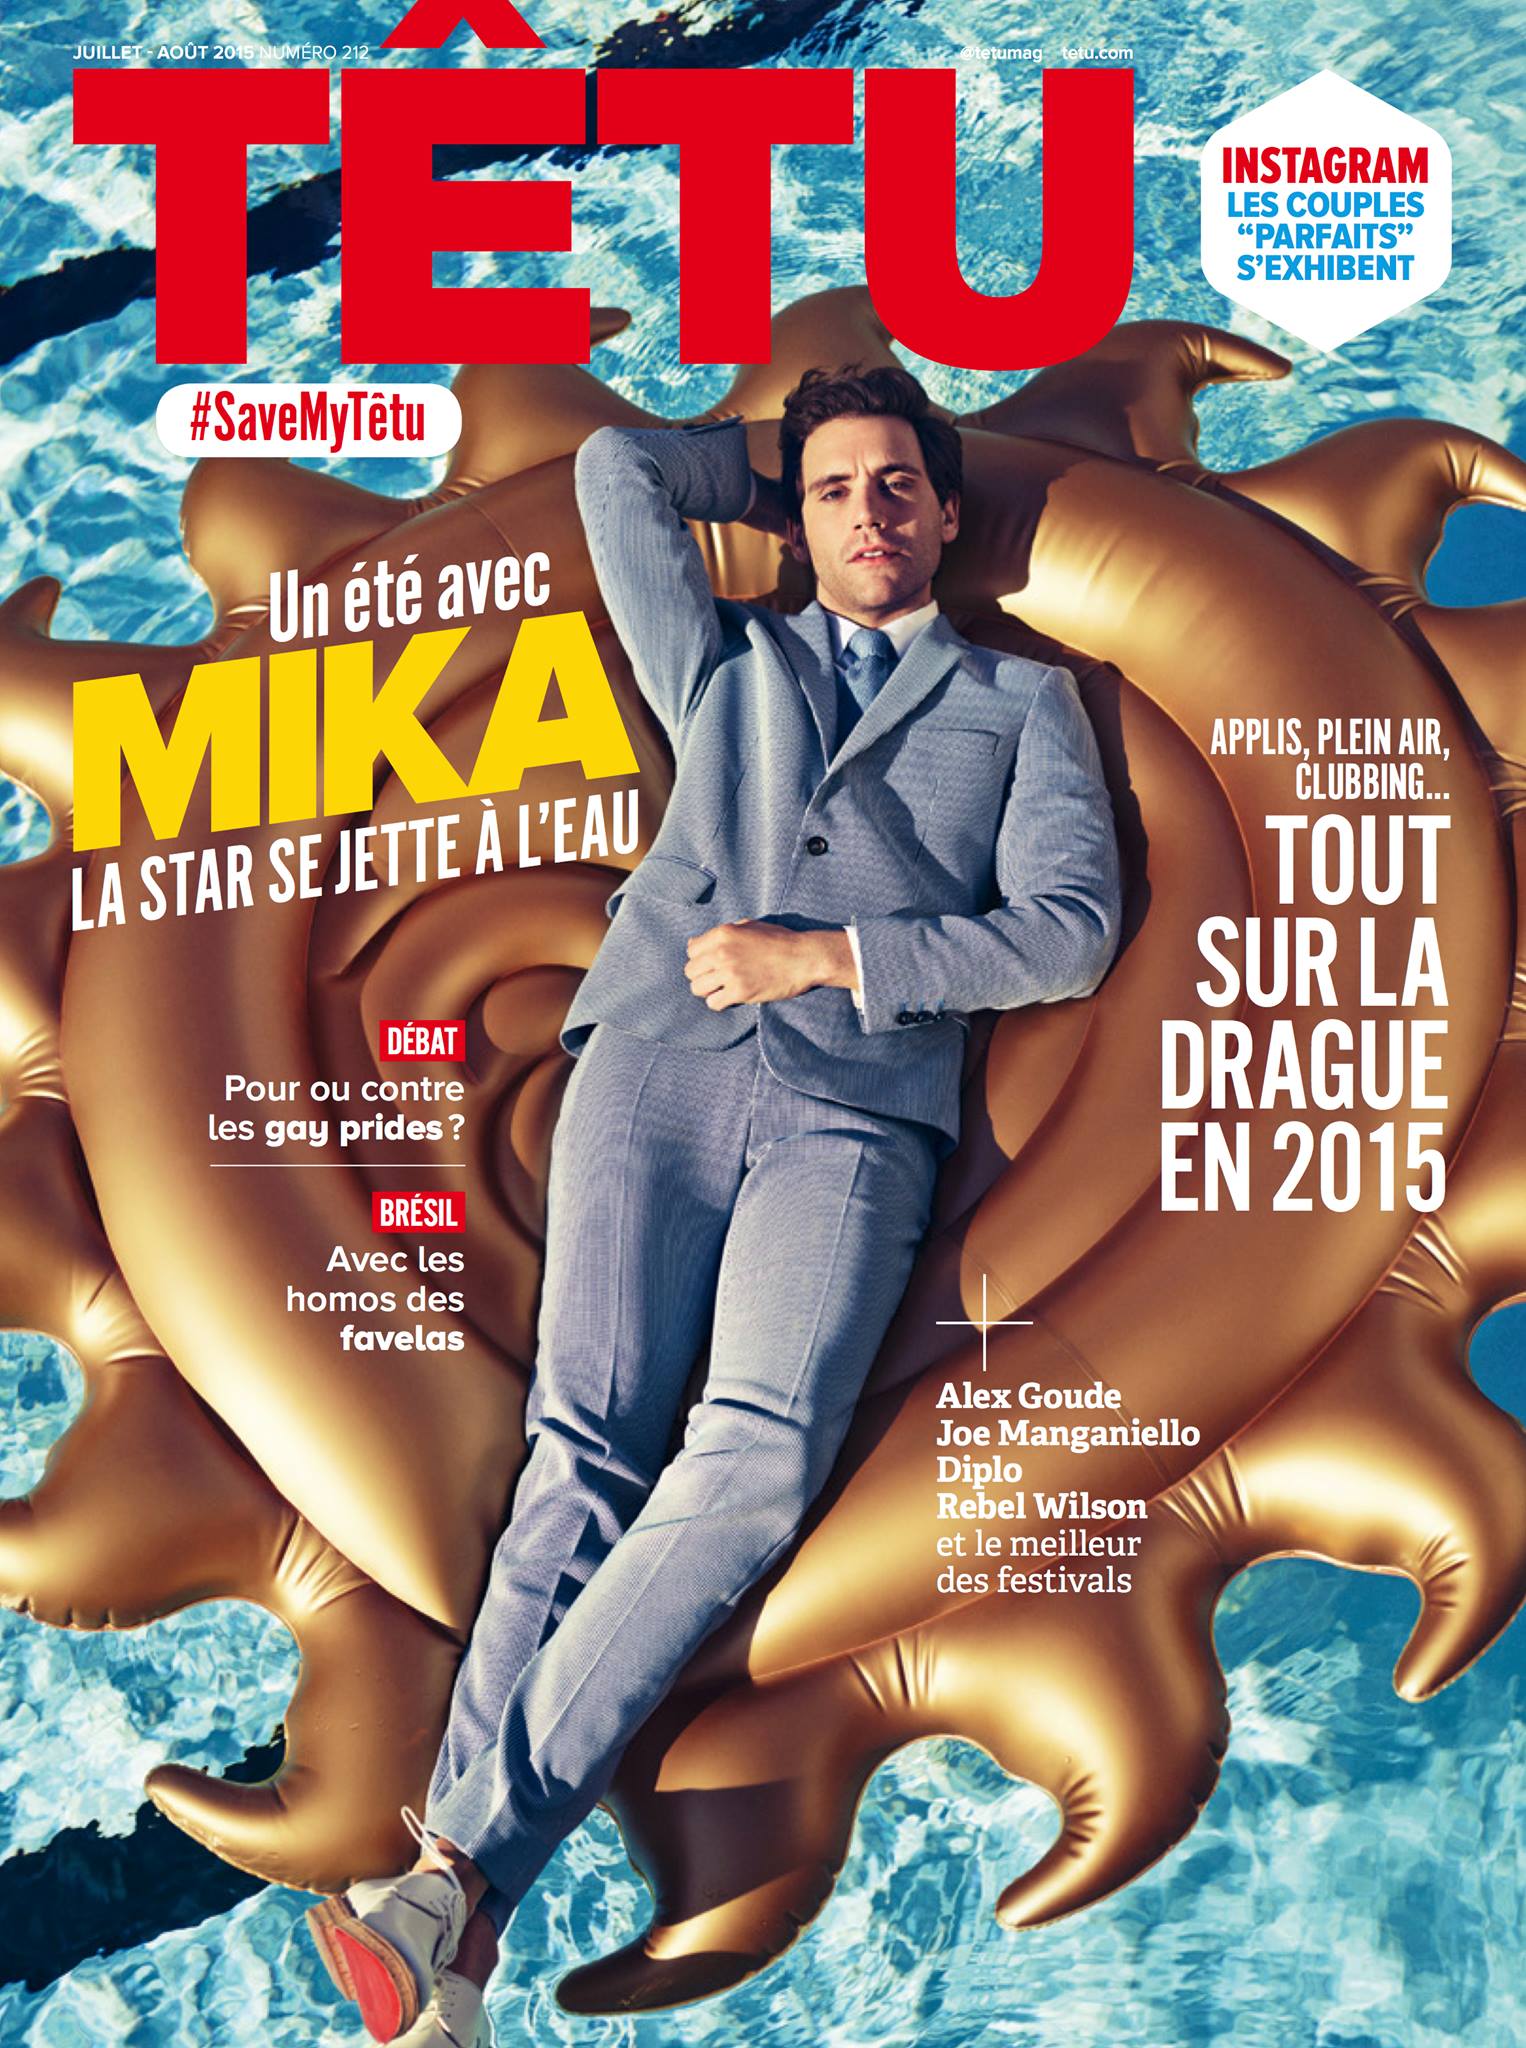 Mika Lounges in Pool for July/August 2015 Tetu Cover Photo Shoot